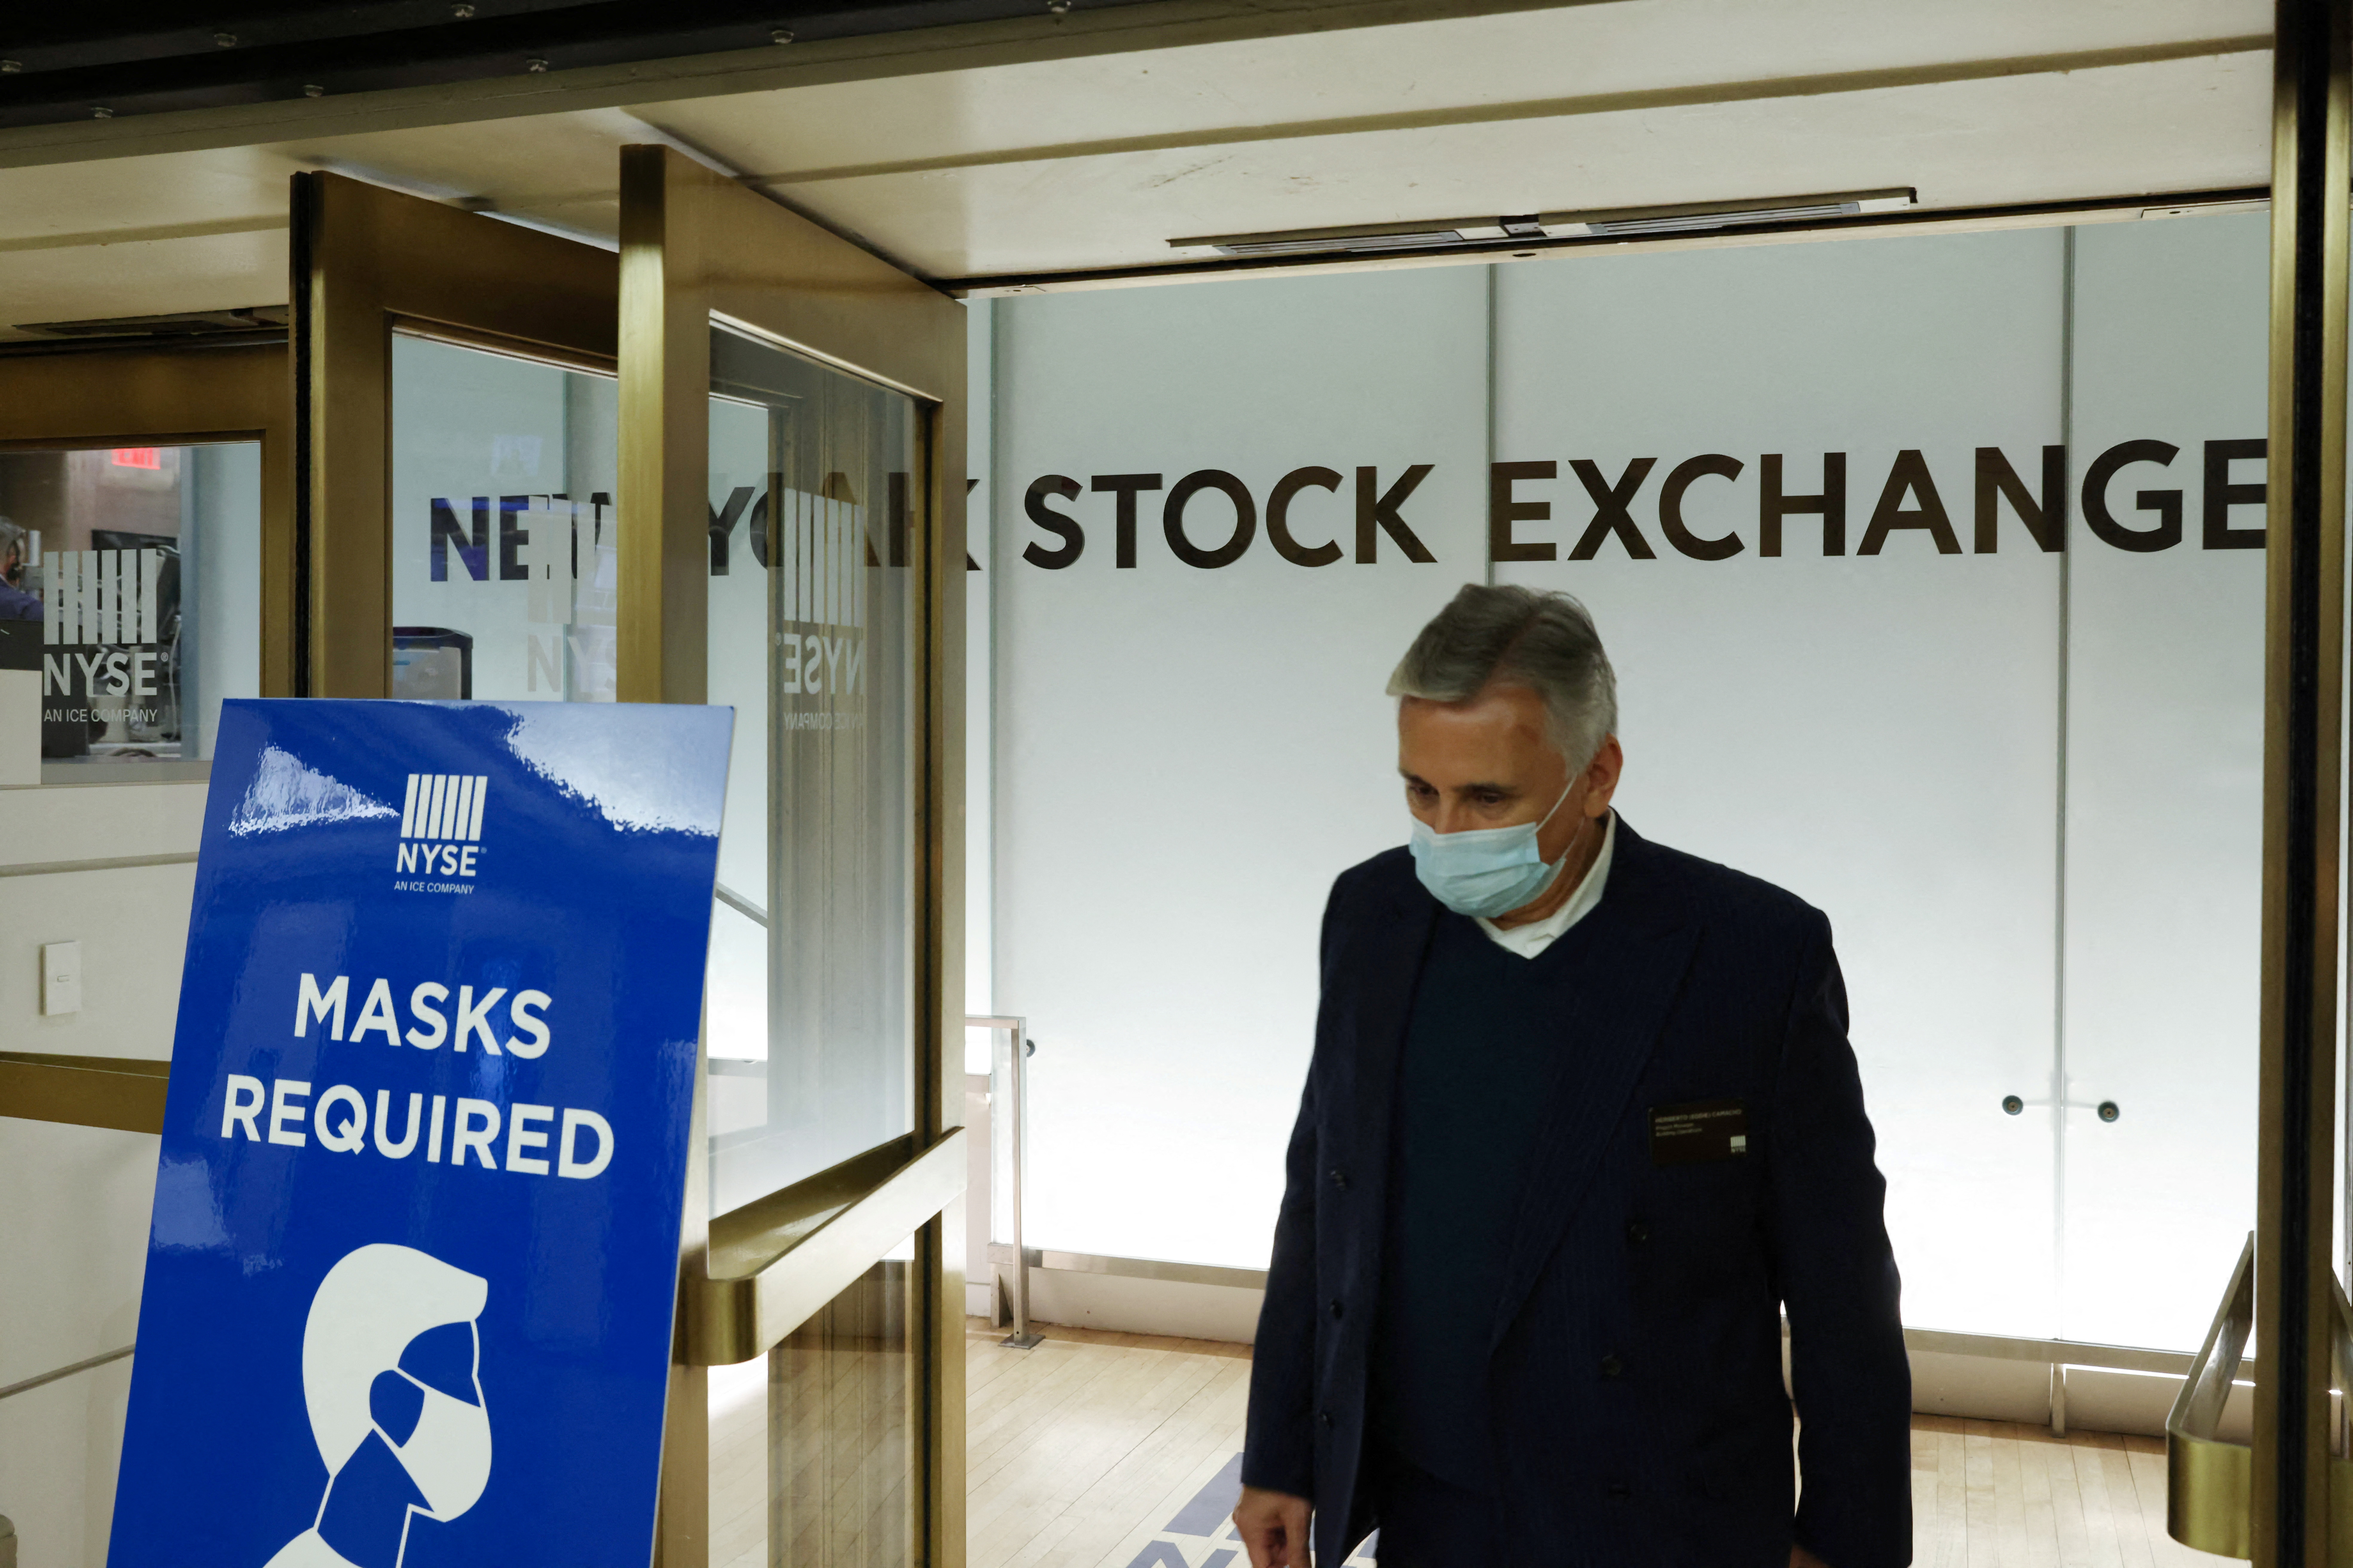 Signage is seen directing people to wear face masks at the New York Stock Exchange (NYSE) in New York City